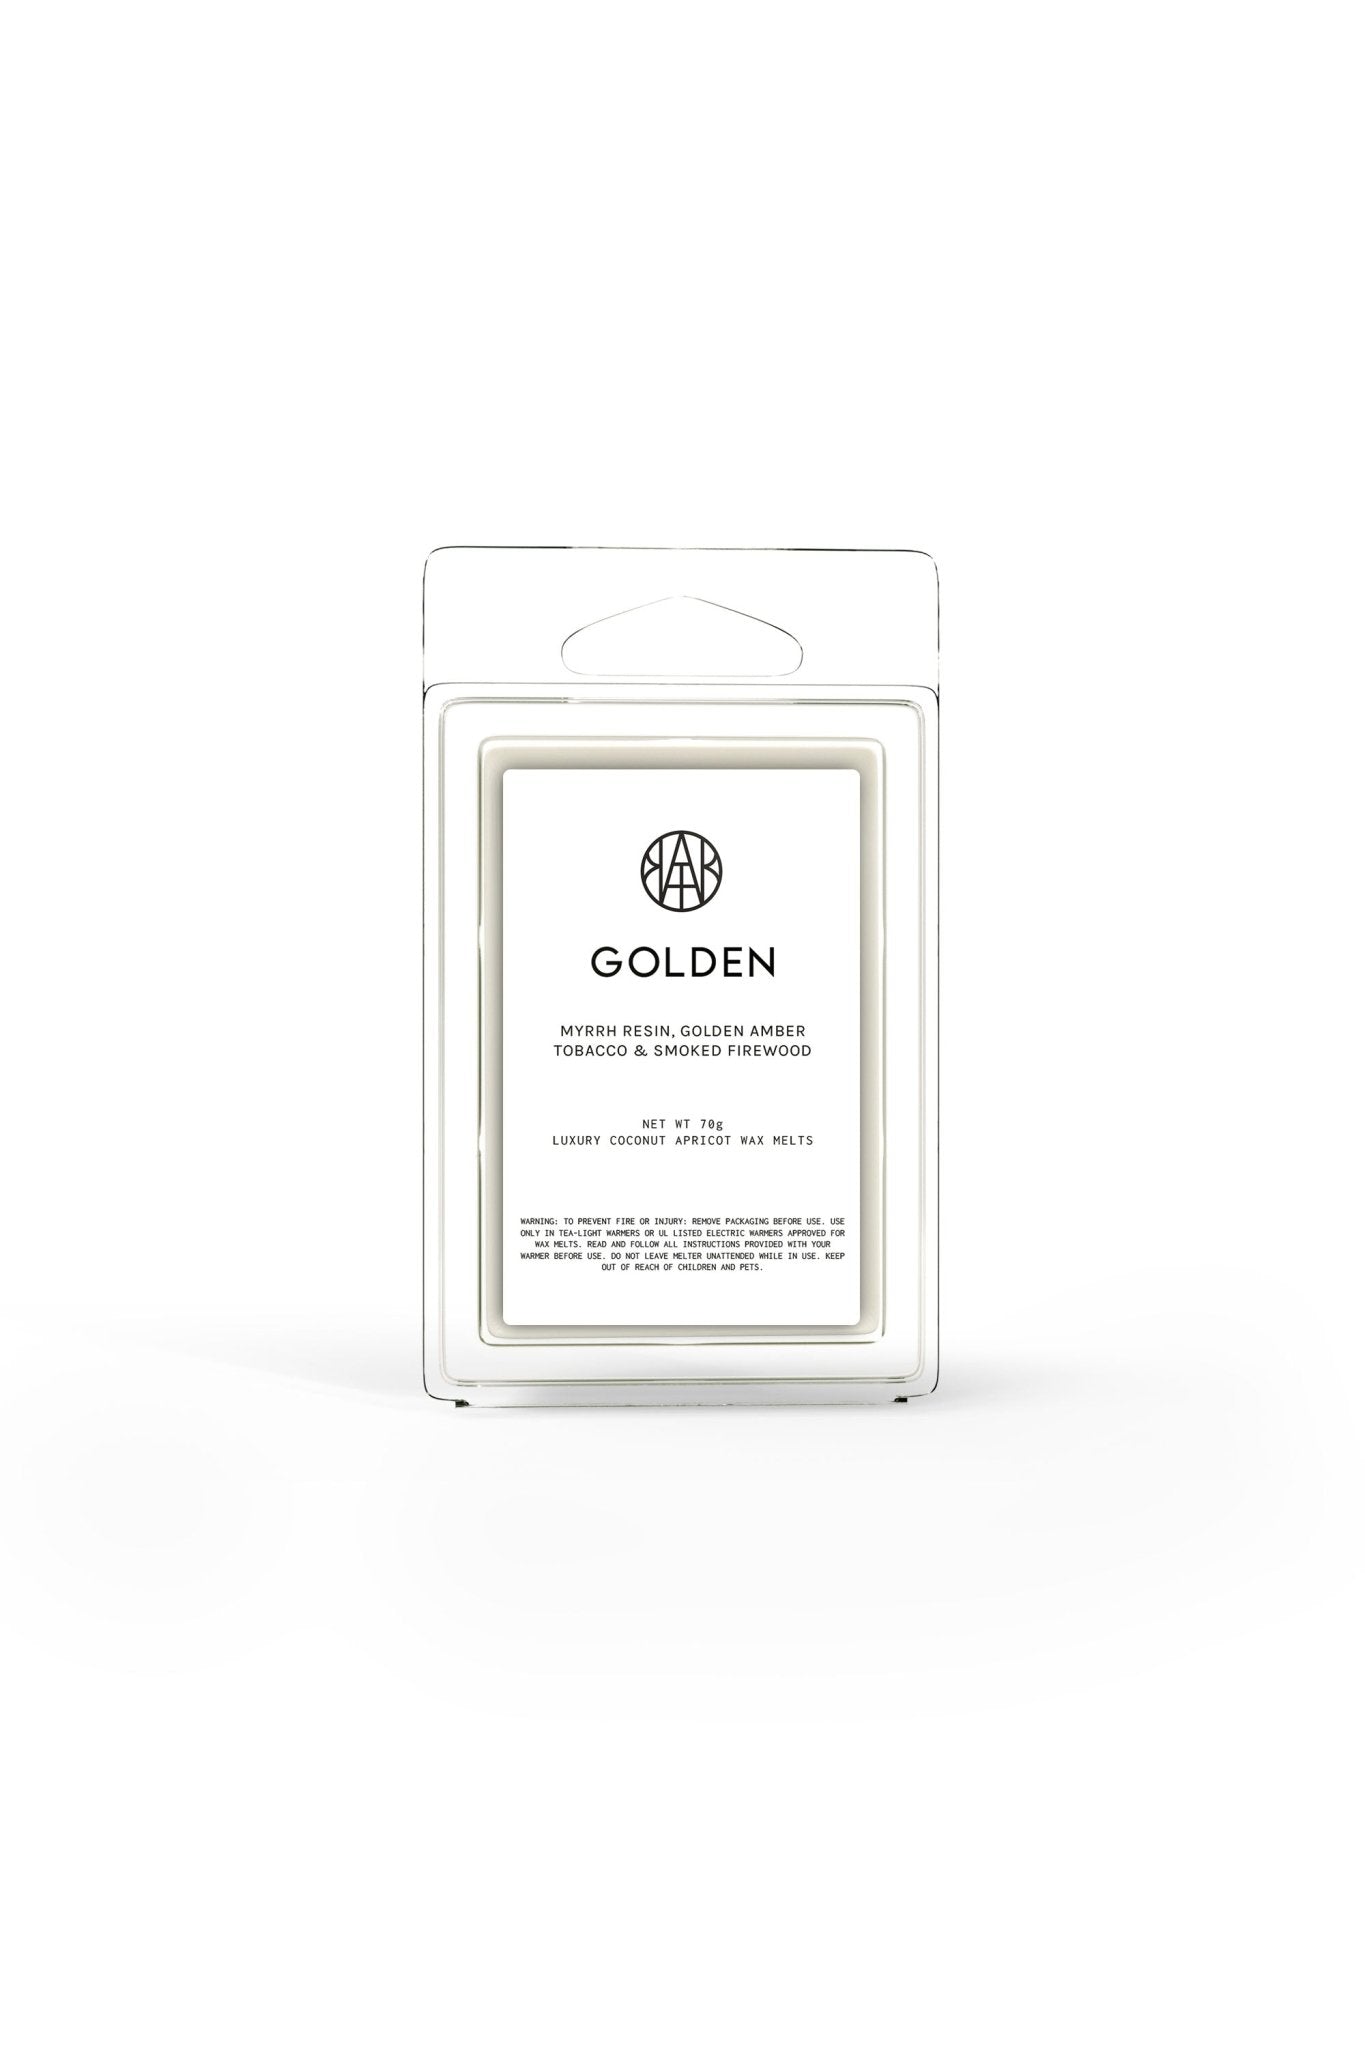 GOLDEN - Wax Melt - AEMBR - Clean Luxury Candles, Wax Melts & Laundry Care